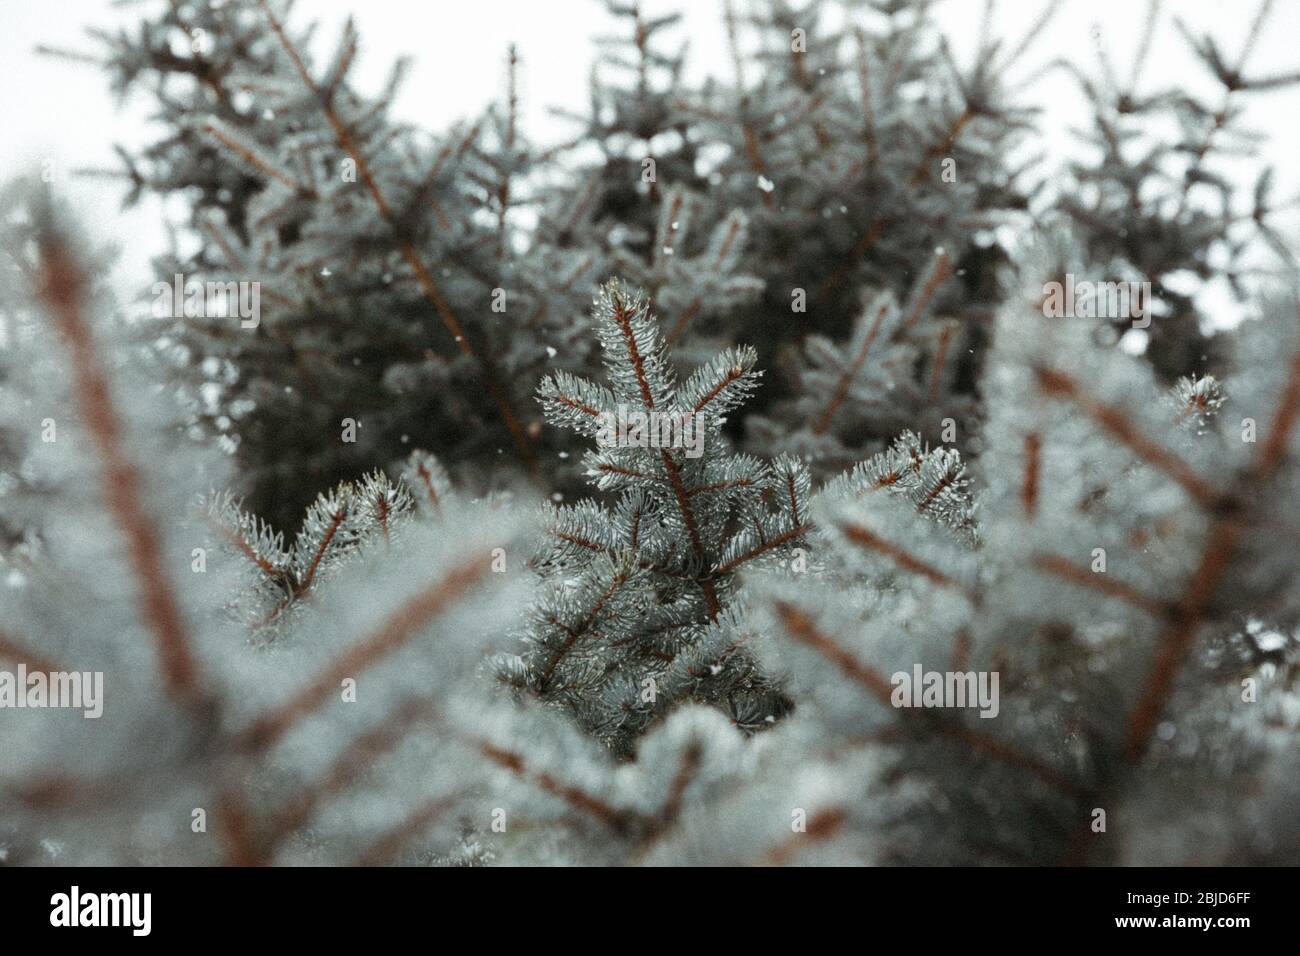 looking up at wet and snowy blue spruce branches during winter storm Stock Photo